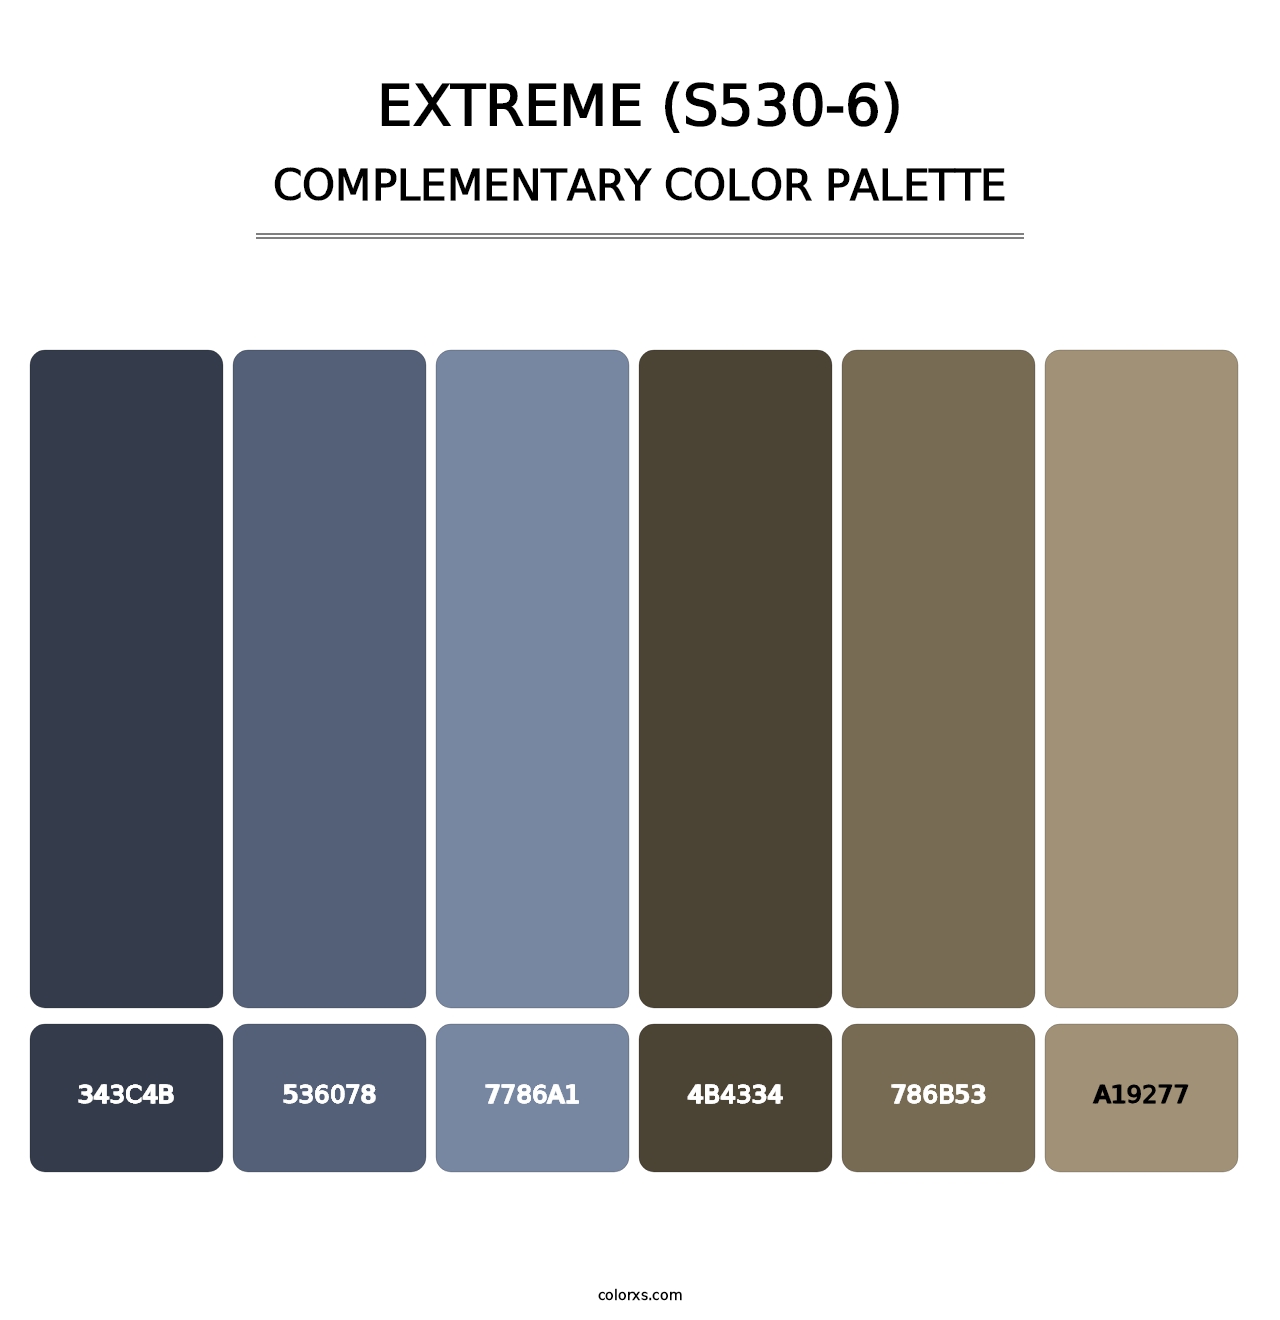 Extreme (S530-6) - Complementary Color Palette